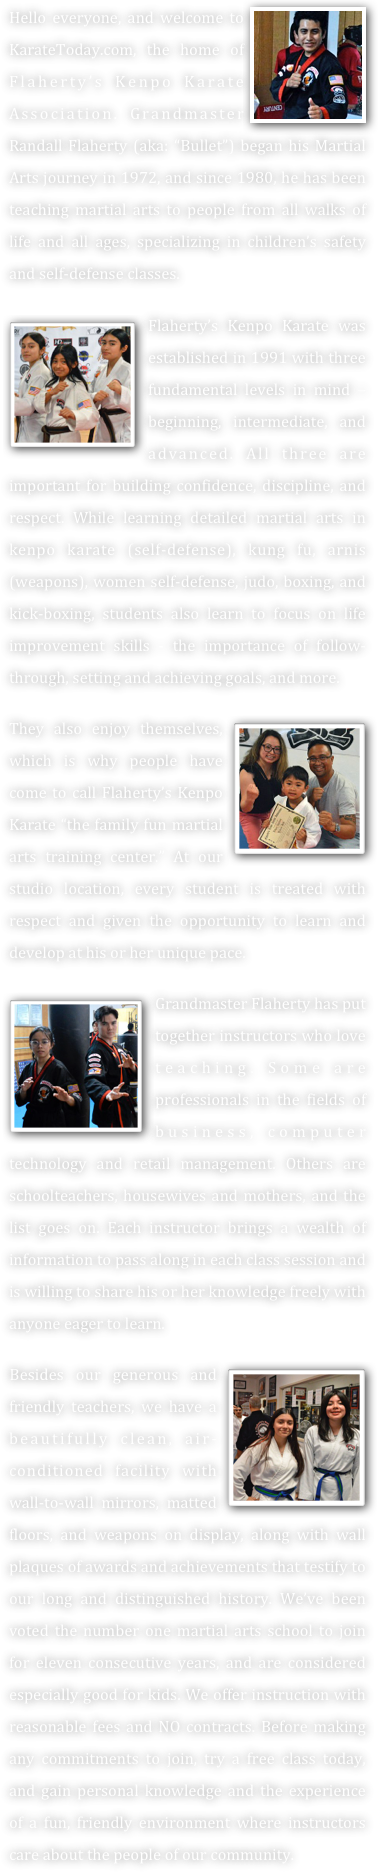 Low Starter Rates
     



Consider Us...

 Terrific Prices
 Great for Children 
    (ages: 5 & Up)
 Classes for Teens & Adults
 No Contracts
 Free Starter Uniform
 Up to One Free Month
 Over 40 years Experience
 Grandmaster Instruction
 Ultimate in Self-defense
 Friendly Environment
 Knowledgeable Teachers
 Excellent Student Mentors
 Certified in Child Psychology.
 Certified in CPR, Adult First Aid, AED, and Pediatrics.
 Martial Arts Hall of Fame inductees (A-List Recipients).







2015 KCRA 3 A-List Reports:
“Voters Love
Flaherty’s Kenpo Karate.”

Ranked in the top “5” Schools out of 106 for Best Martial Arts.

 Best of San Joaquin
 Best of the Bay
 Parent Magazine
   (Voted Us: Good for kids)








 On Saturday, June 29, 2019, Grandmaster Flaherty was selected as one of five martial artists to represent the entire state of California as an inducted member of the American Martial Arts Alliance, Who’s Really Who in the Martial Arts, and as one of the authors of the Masters and Pioneers Autobiography book.






On Saturday, January 25, 2020 Grandmaster Randall Flaherty was inducted into the Action Martial Arts Magazine Hall of Honors. He was one of only five people worldwide chosen to receive the “Distinguished Renowned Martial Artist” award. He was also selected to author a brief autobiography for the 2020 Martial Arts History Book/Directory.

 The Academy received Best of 2022: Stockton Awards (Business Hall of Fame) for 11 consecutive years. (Martial Arts Training)

Thank You
For Voting Us #1